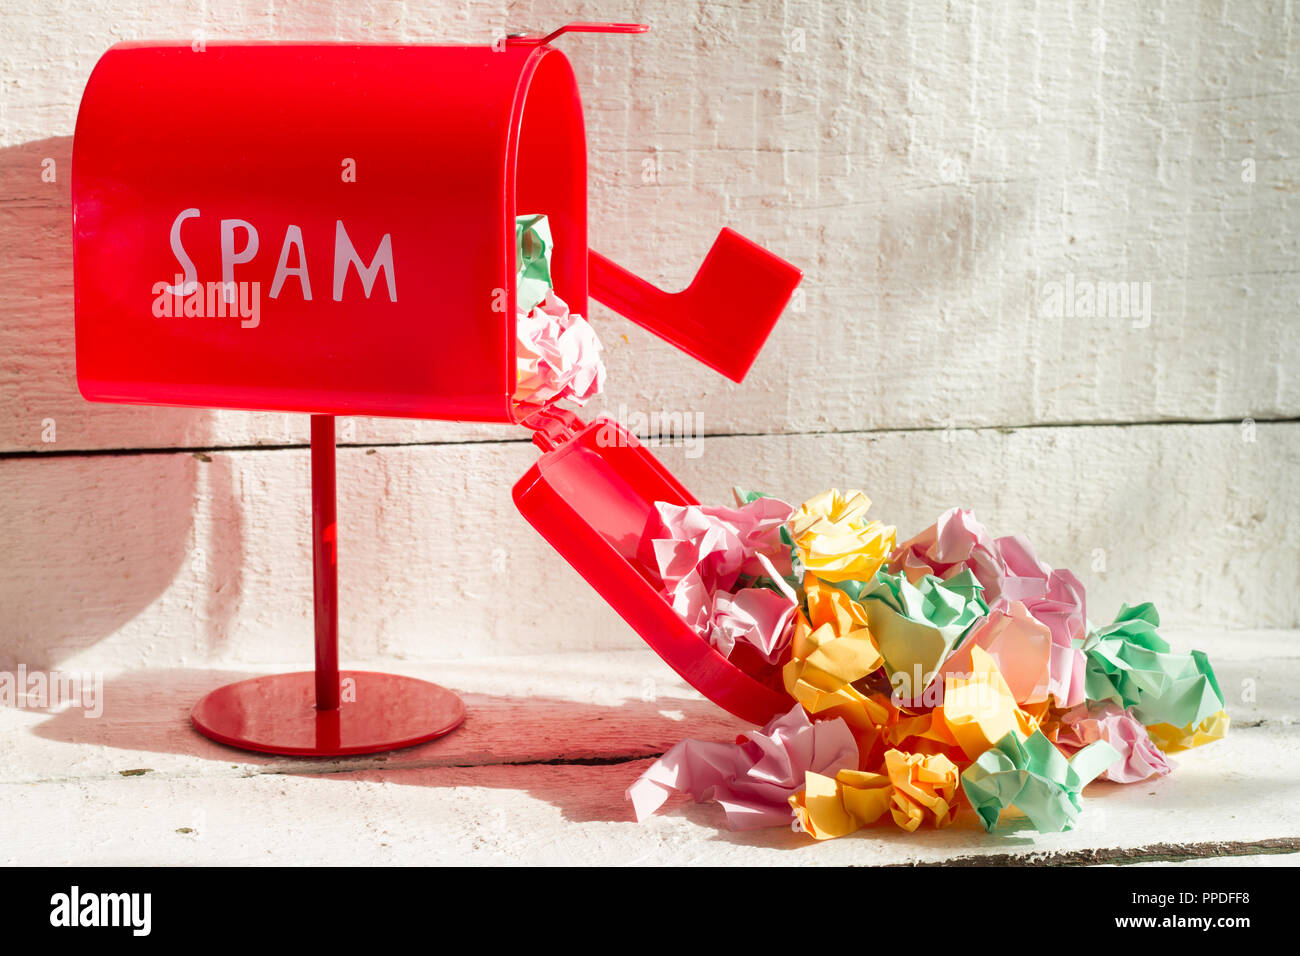 Full red mailbox of spam problem abstract on white background Stock Photo